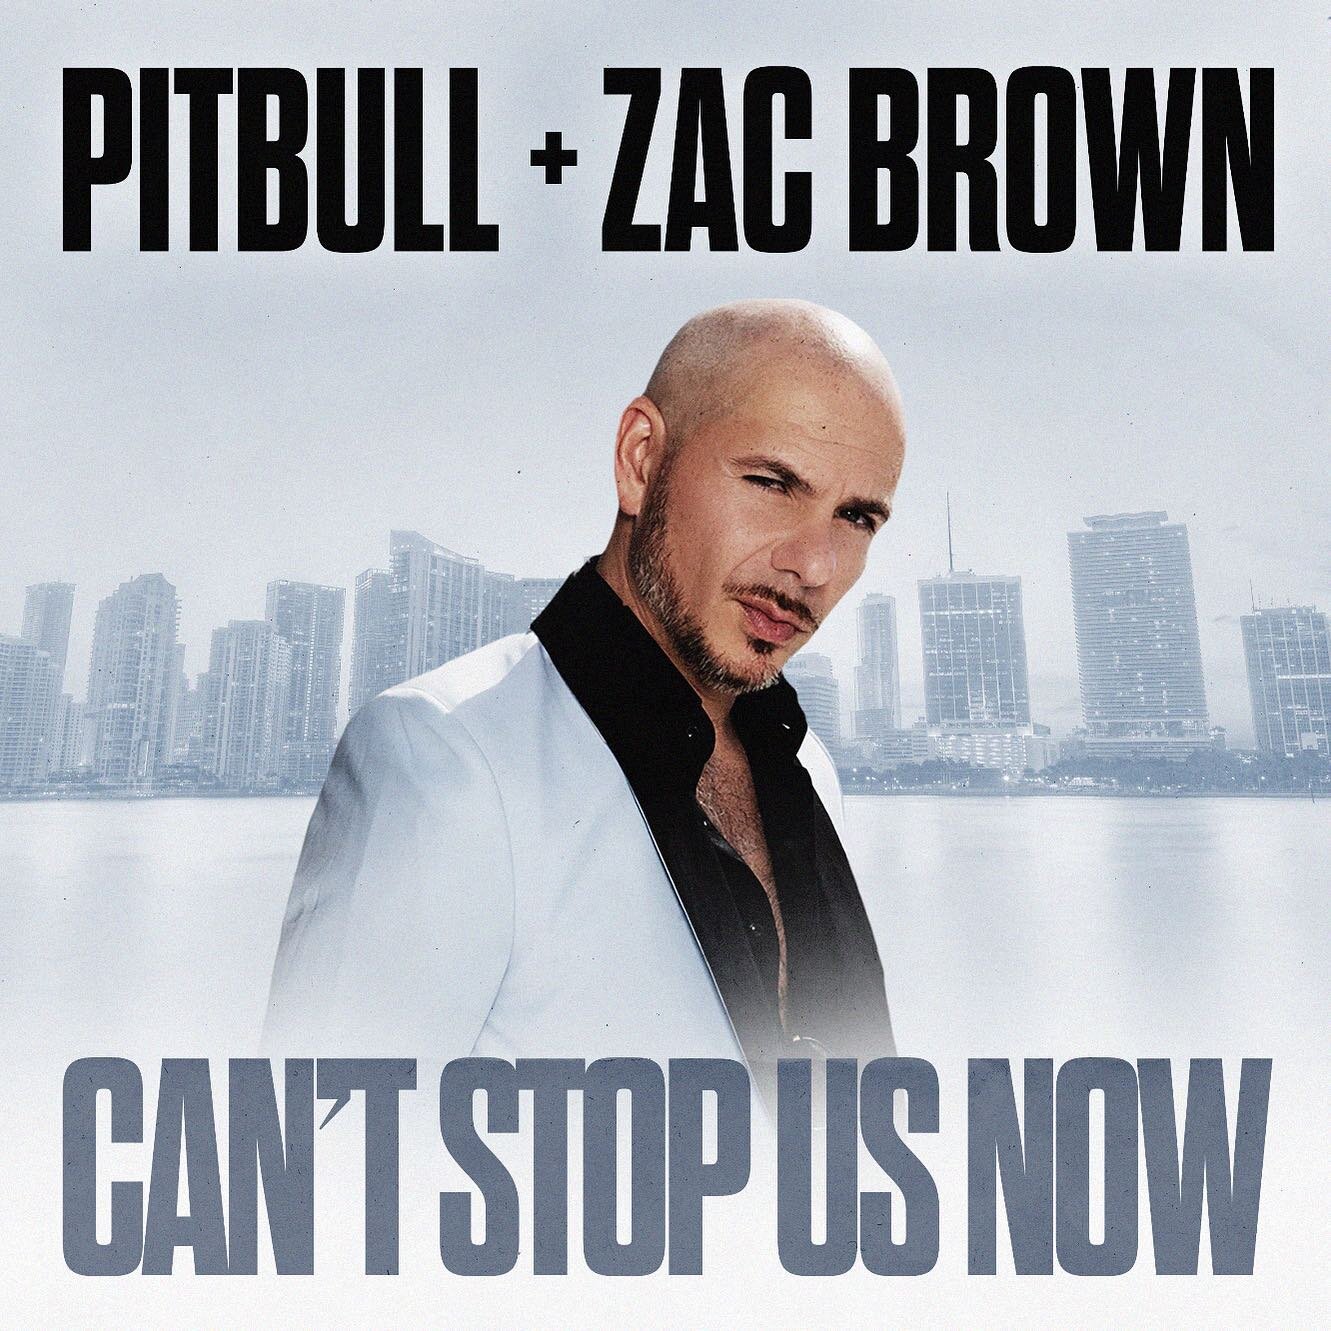 Nothing can stop him now! @pitbull unveils his brand new single &ldquo;Can&rsquo;t Stop Us Now&rdquo; with @zacbrown today! Link in bio for full press release of the song that will undoubtedly become this summer&rsquo;s best anthem! 🙌🏼😎